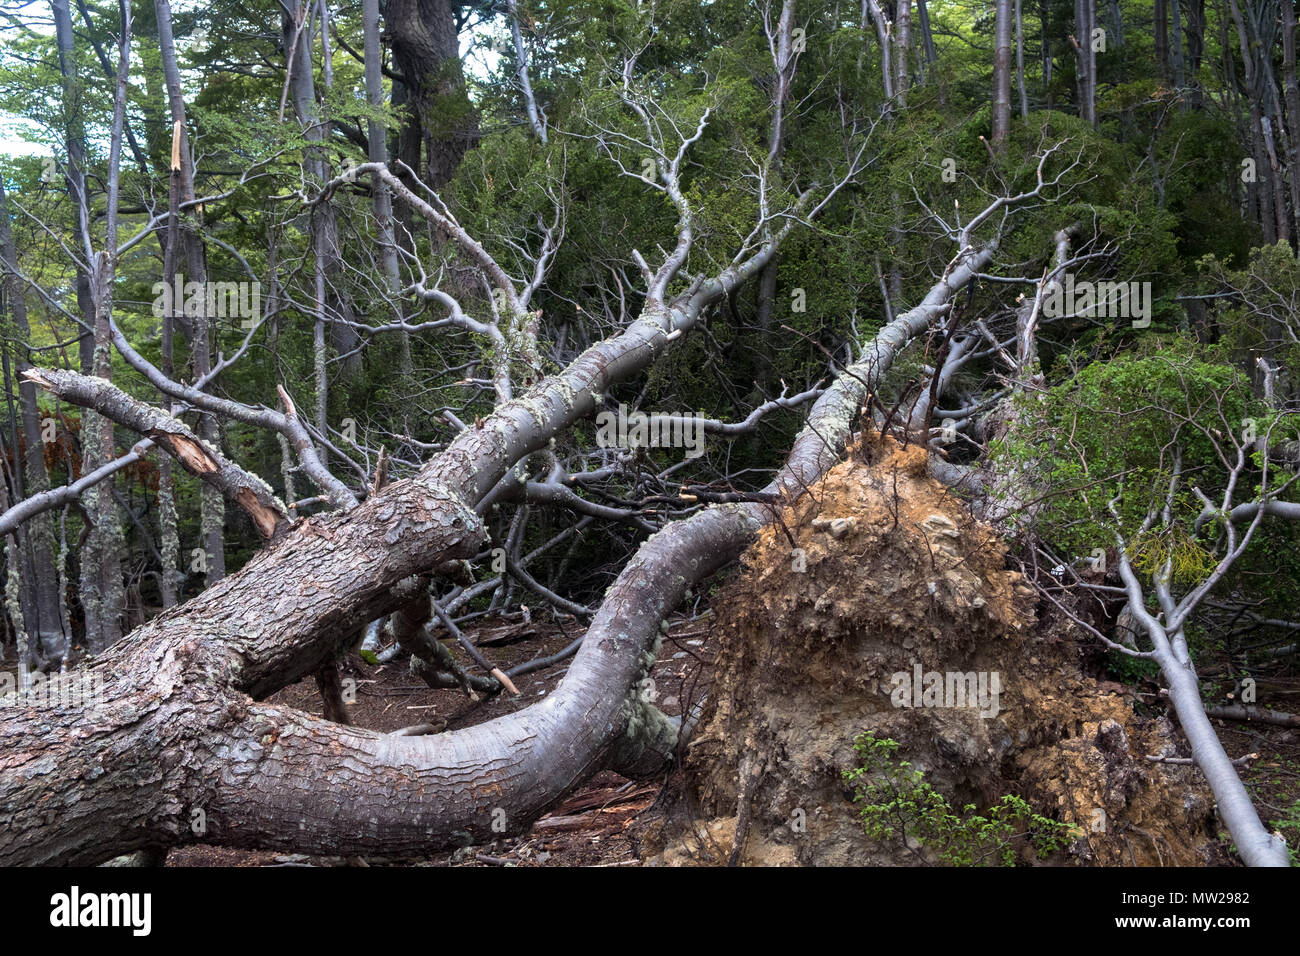 A fallen tree in the Martial moutain range. Erosion and beavers create an ecological challenge near Ushuaia on Tierra del Fuego. Stock Photo